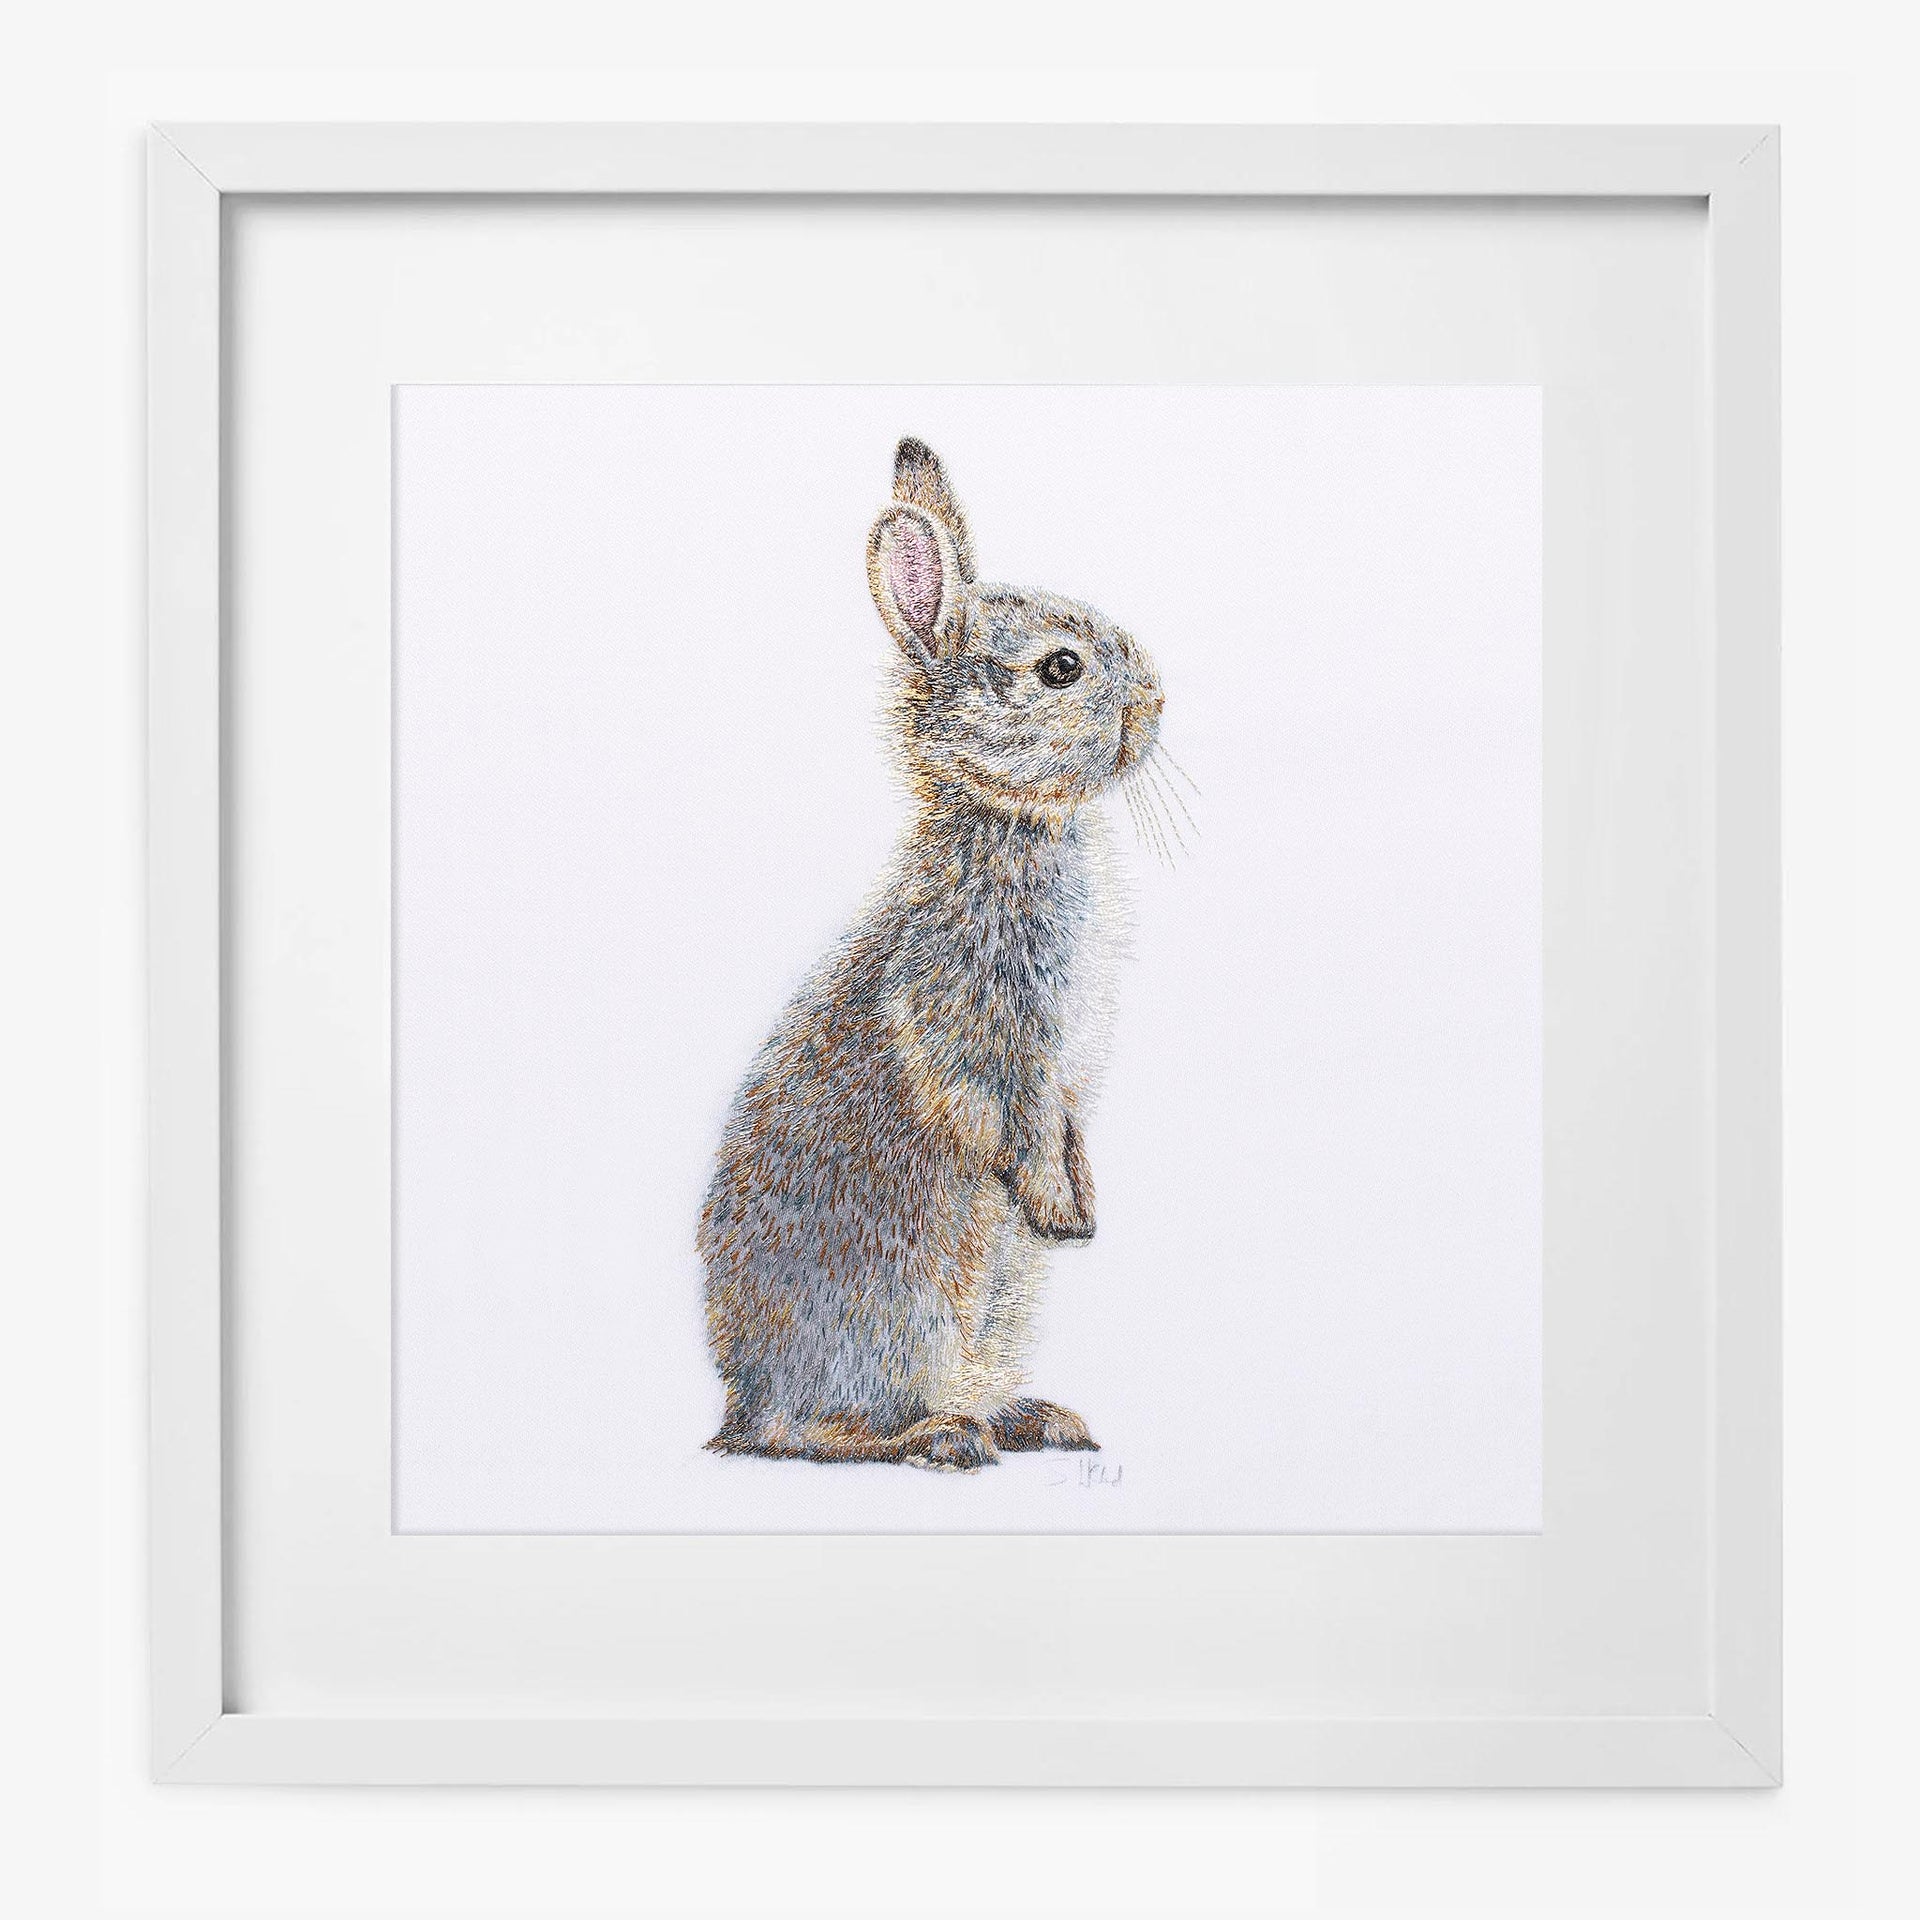 Hand embroidered bunny print in white frame